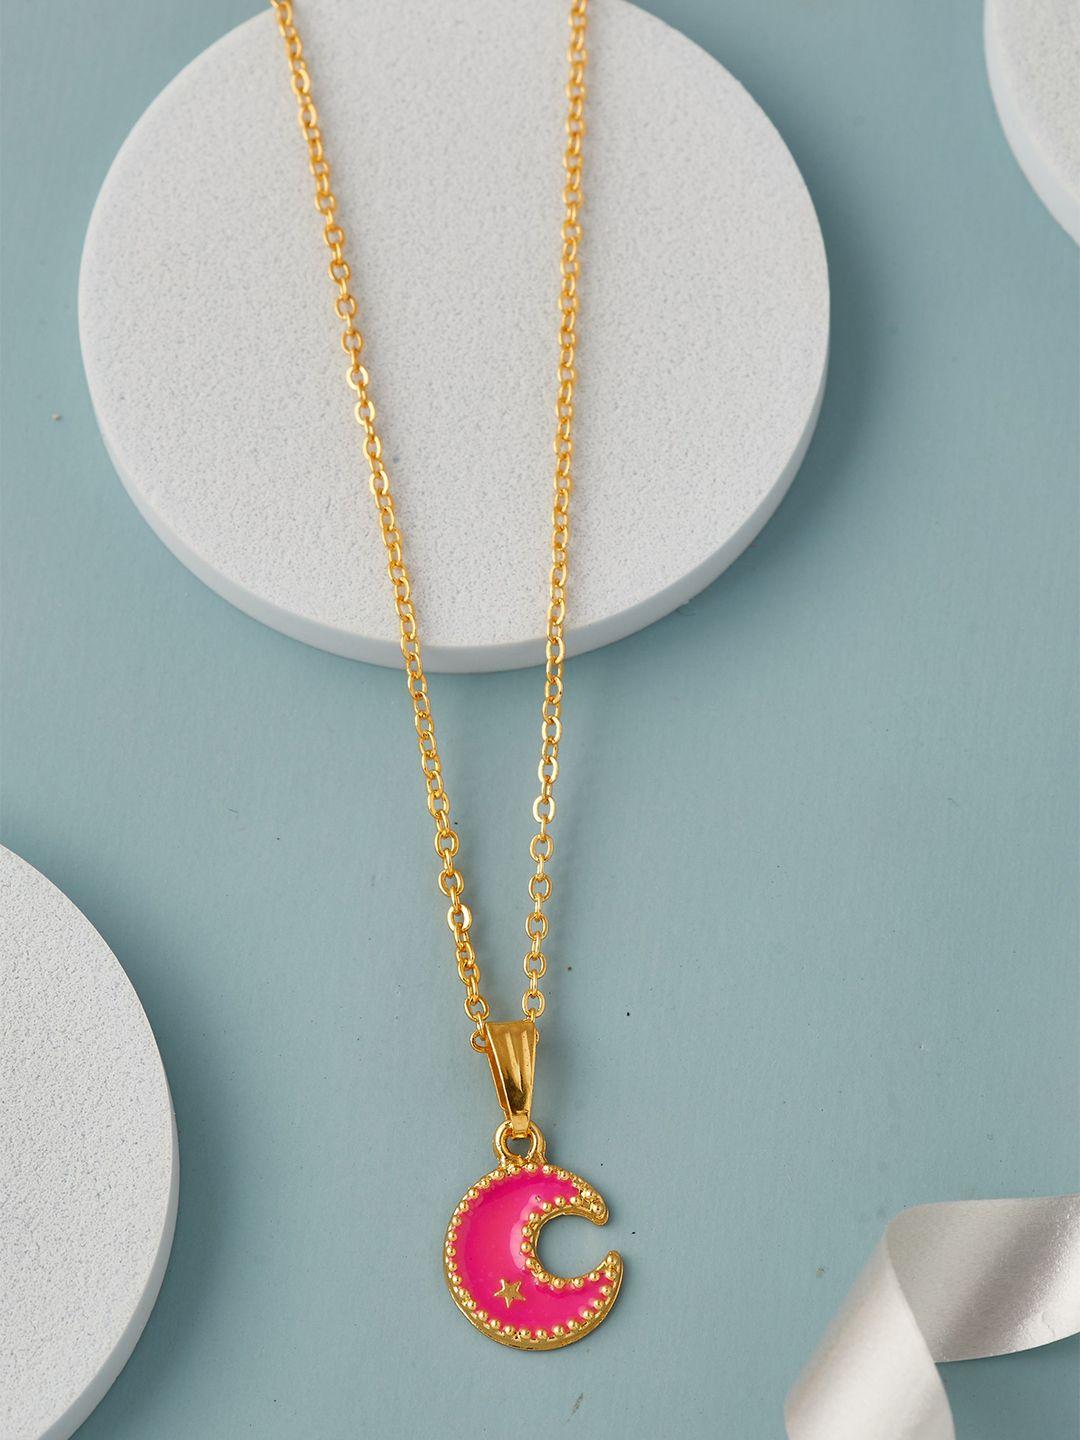 dressberry-gold-plated-crescent-moon-shaped-pendant-with-chain